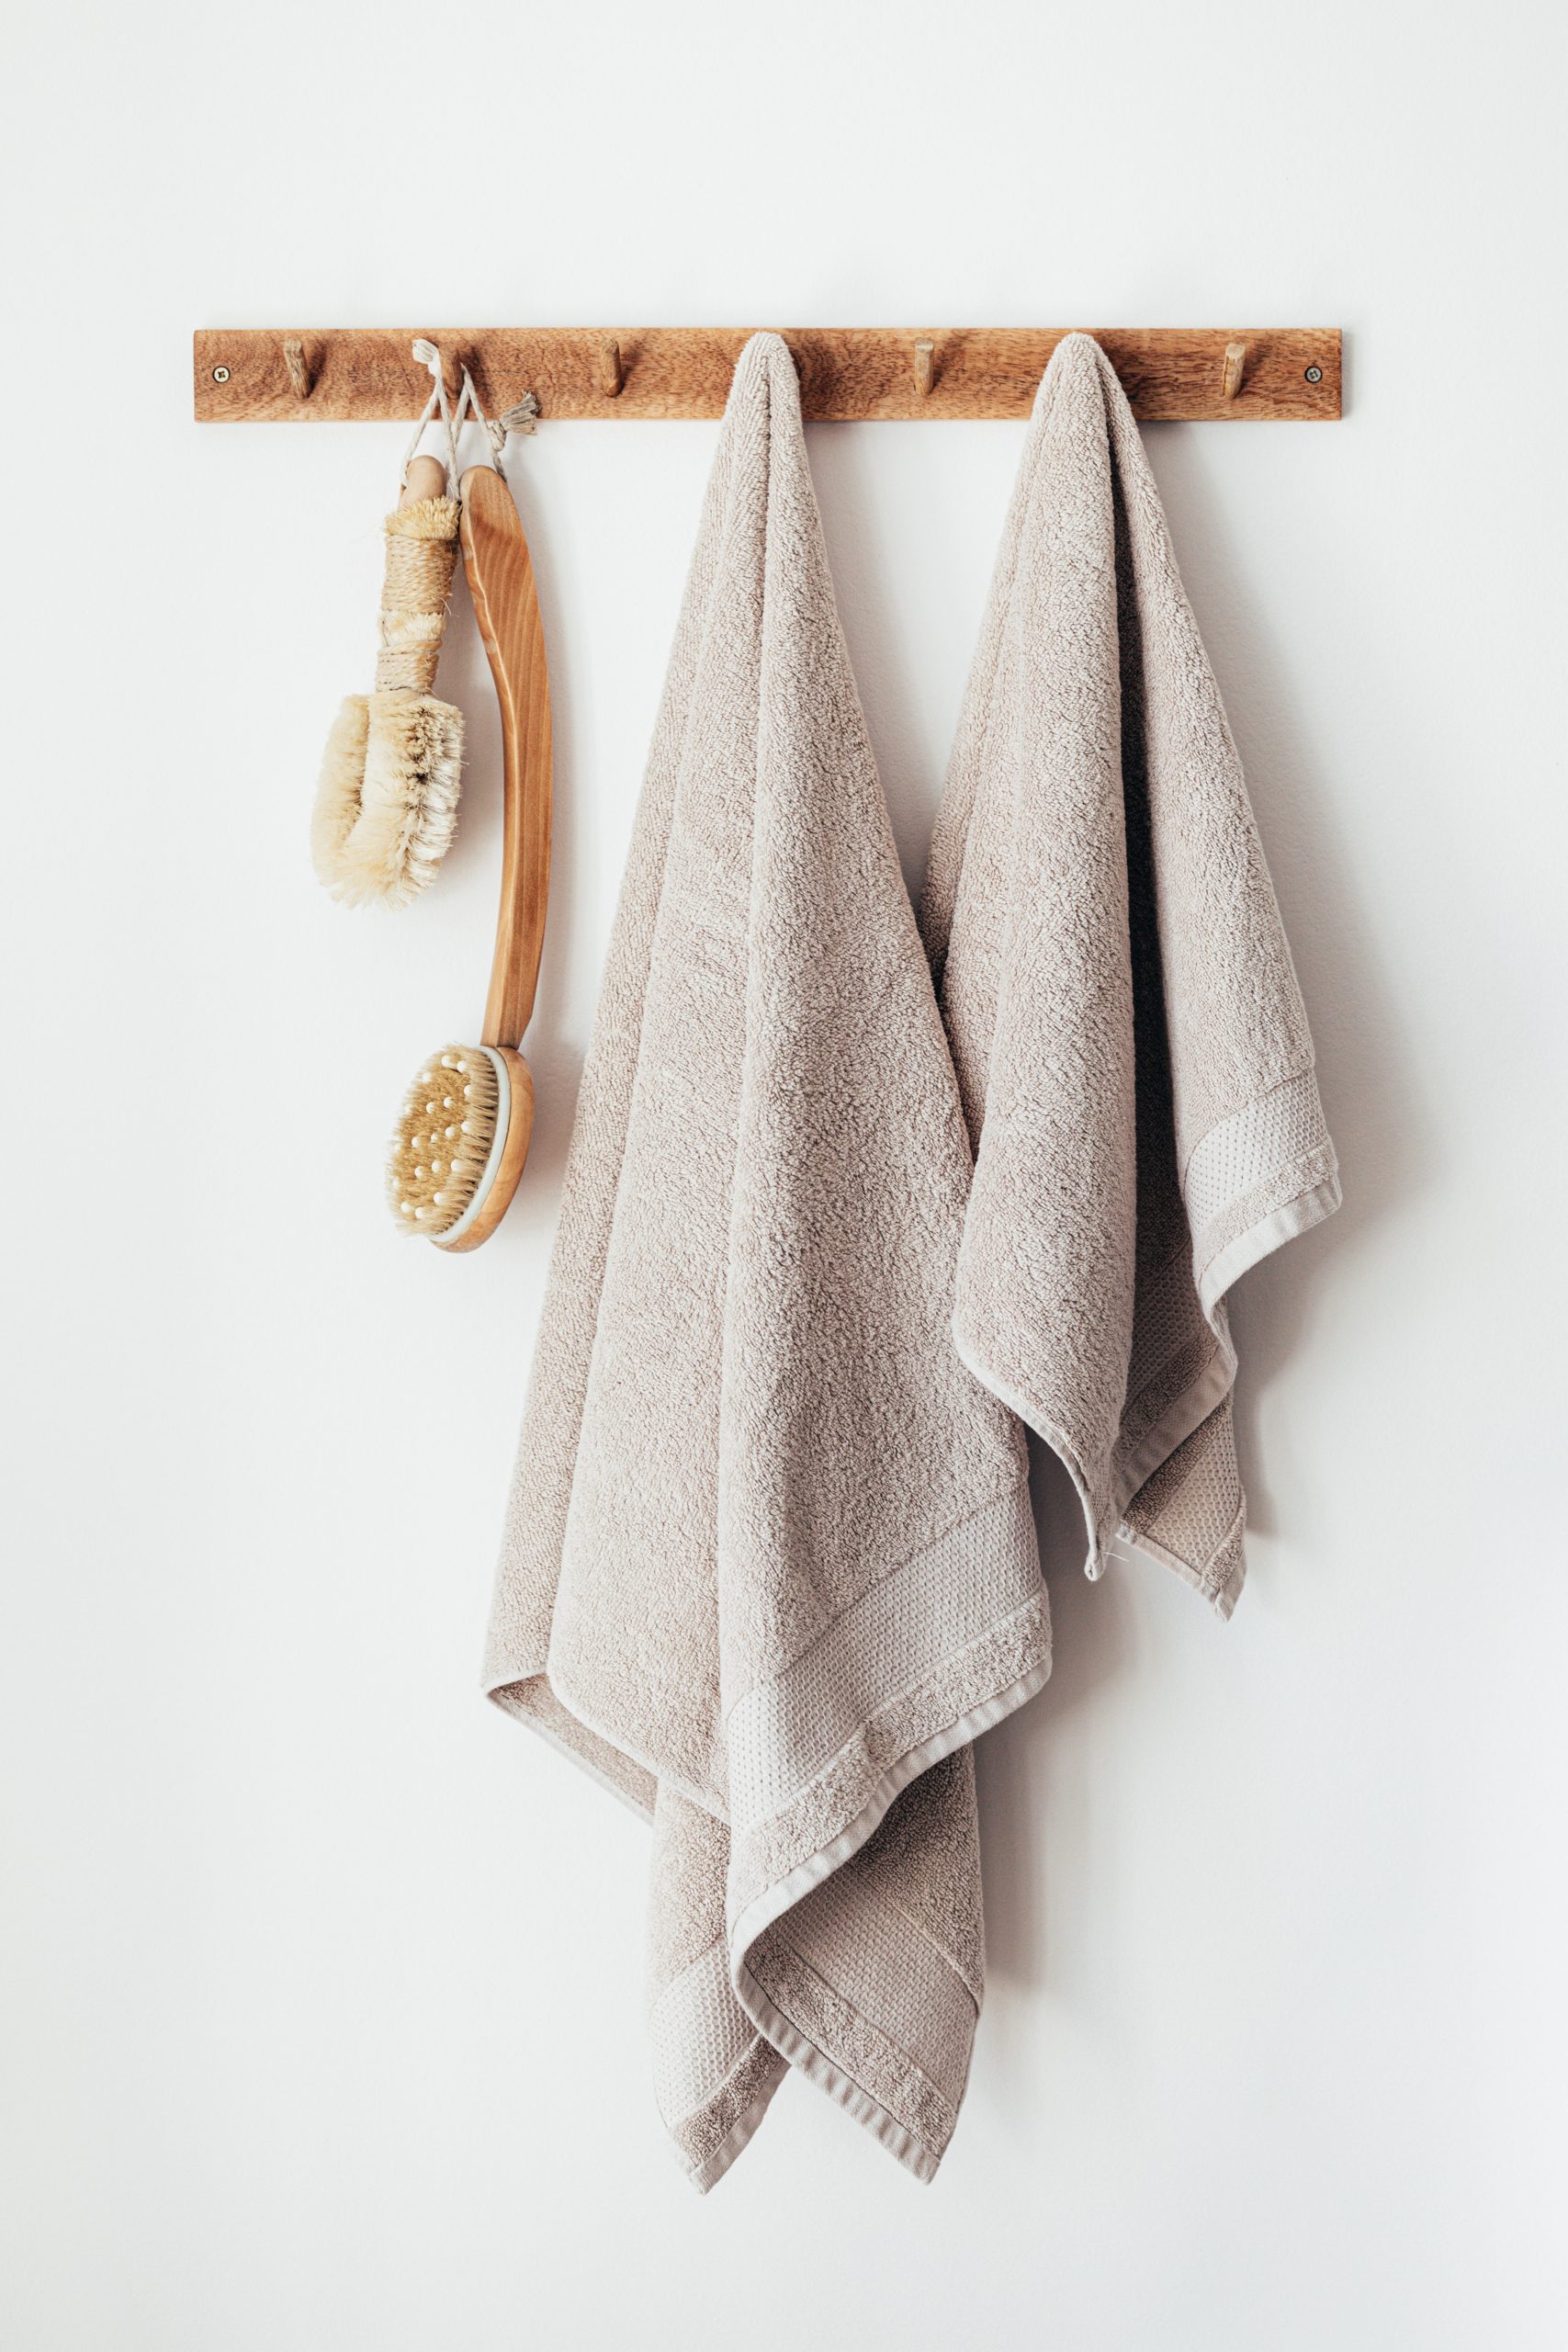 Dry brushing tools hanging up in the bathroom